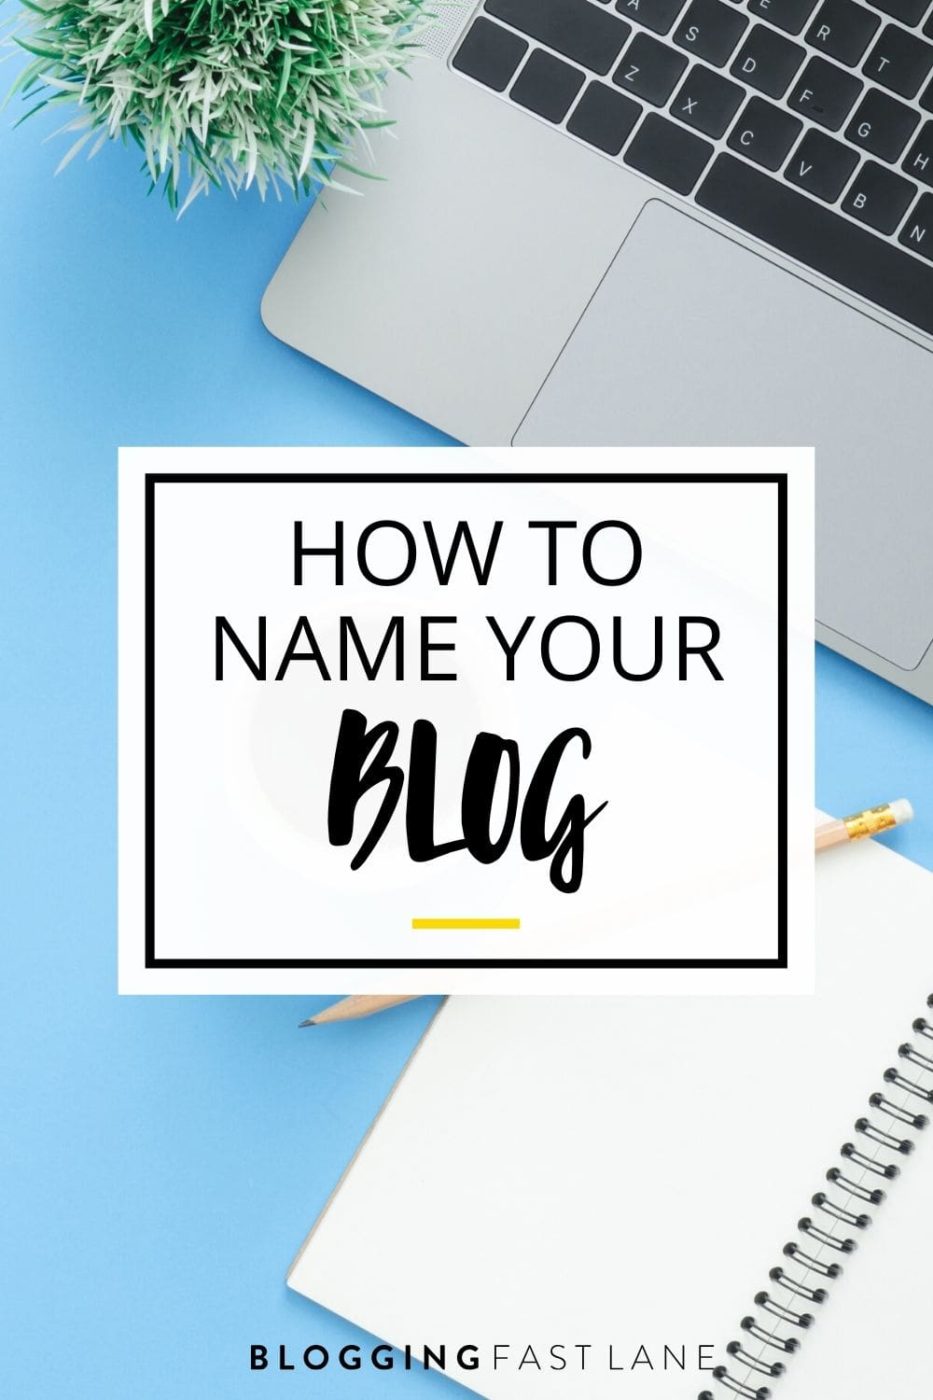 Blog Names: A Step-by-Step Guide on How to Name Your Blog